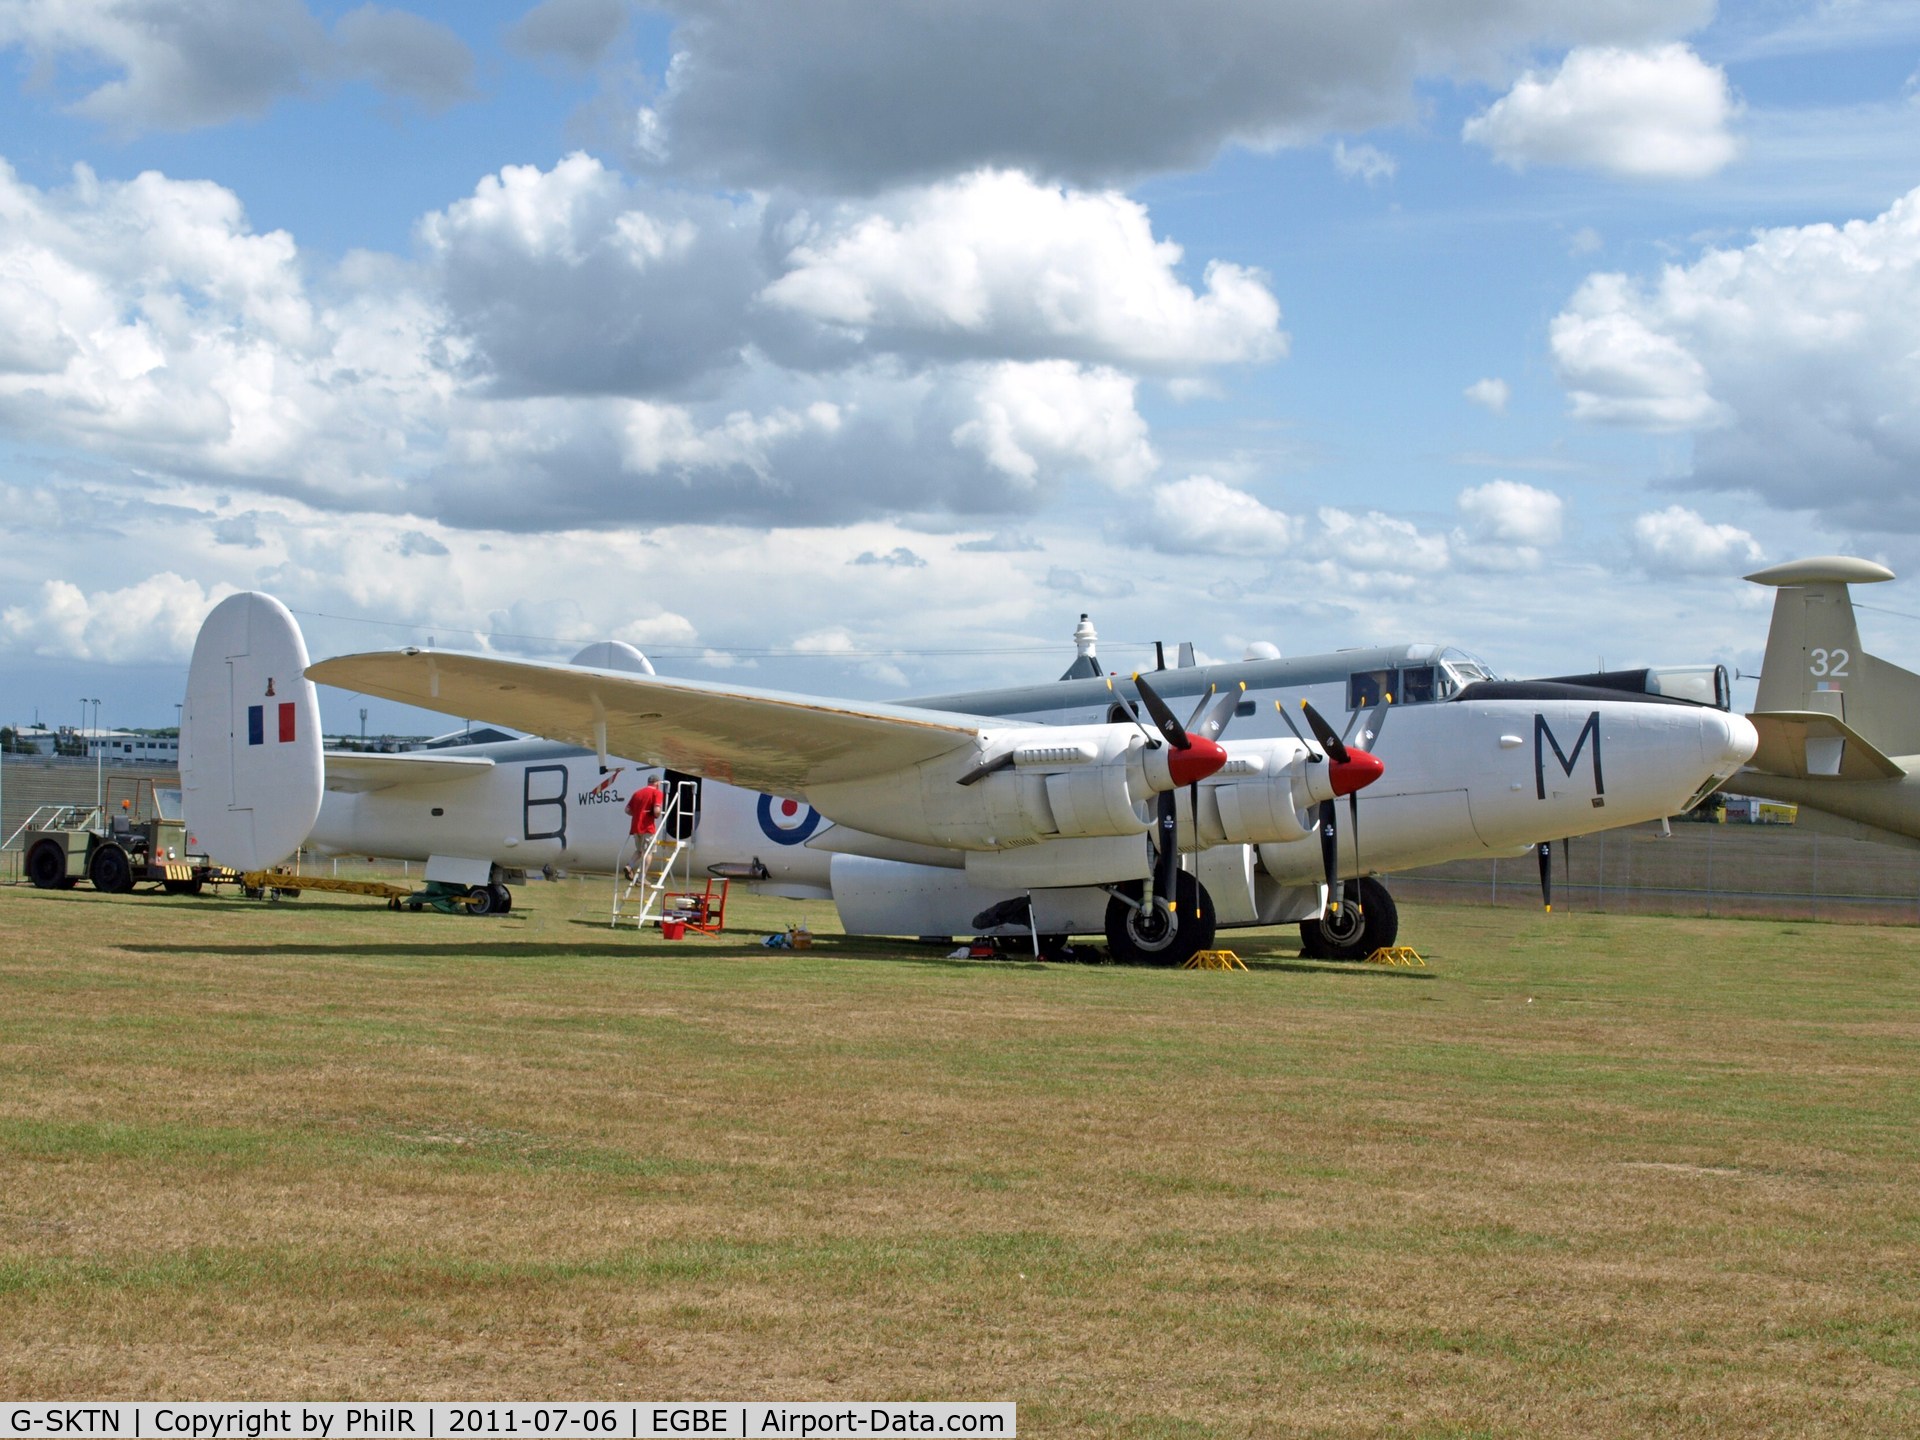 G-SKTN, 1954 Avro 696 Shackleton AEW.2 C/N Not found WR963, Shown here at Baginton in repainted scheme.